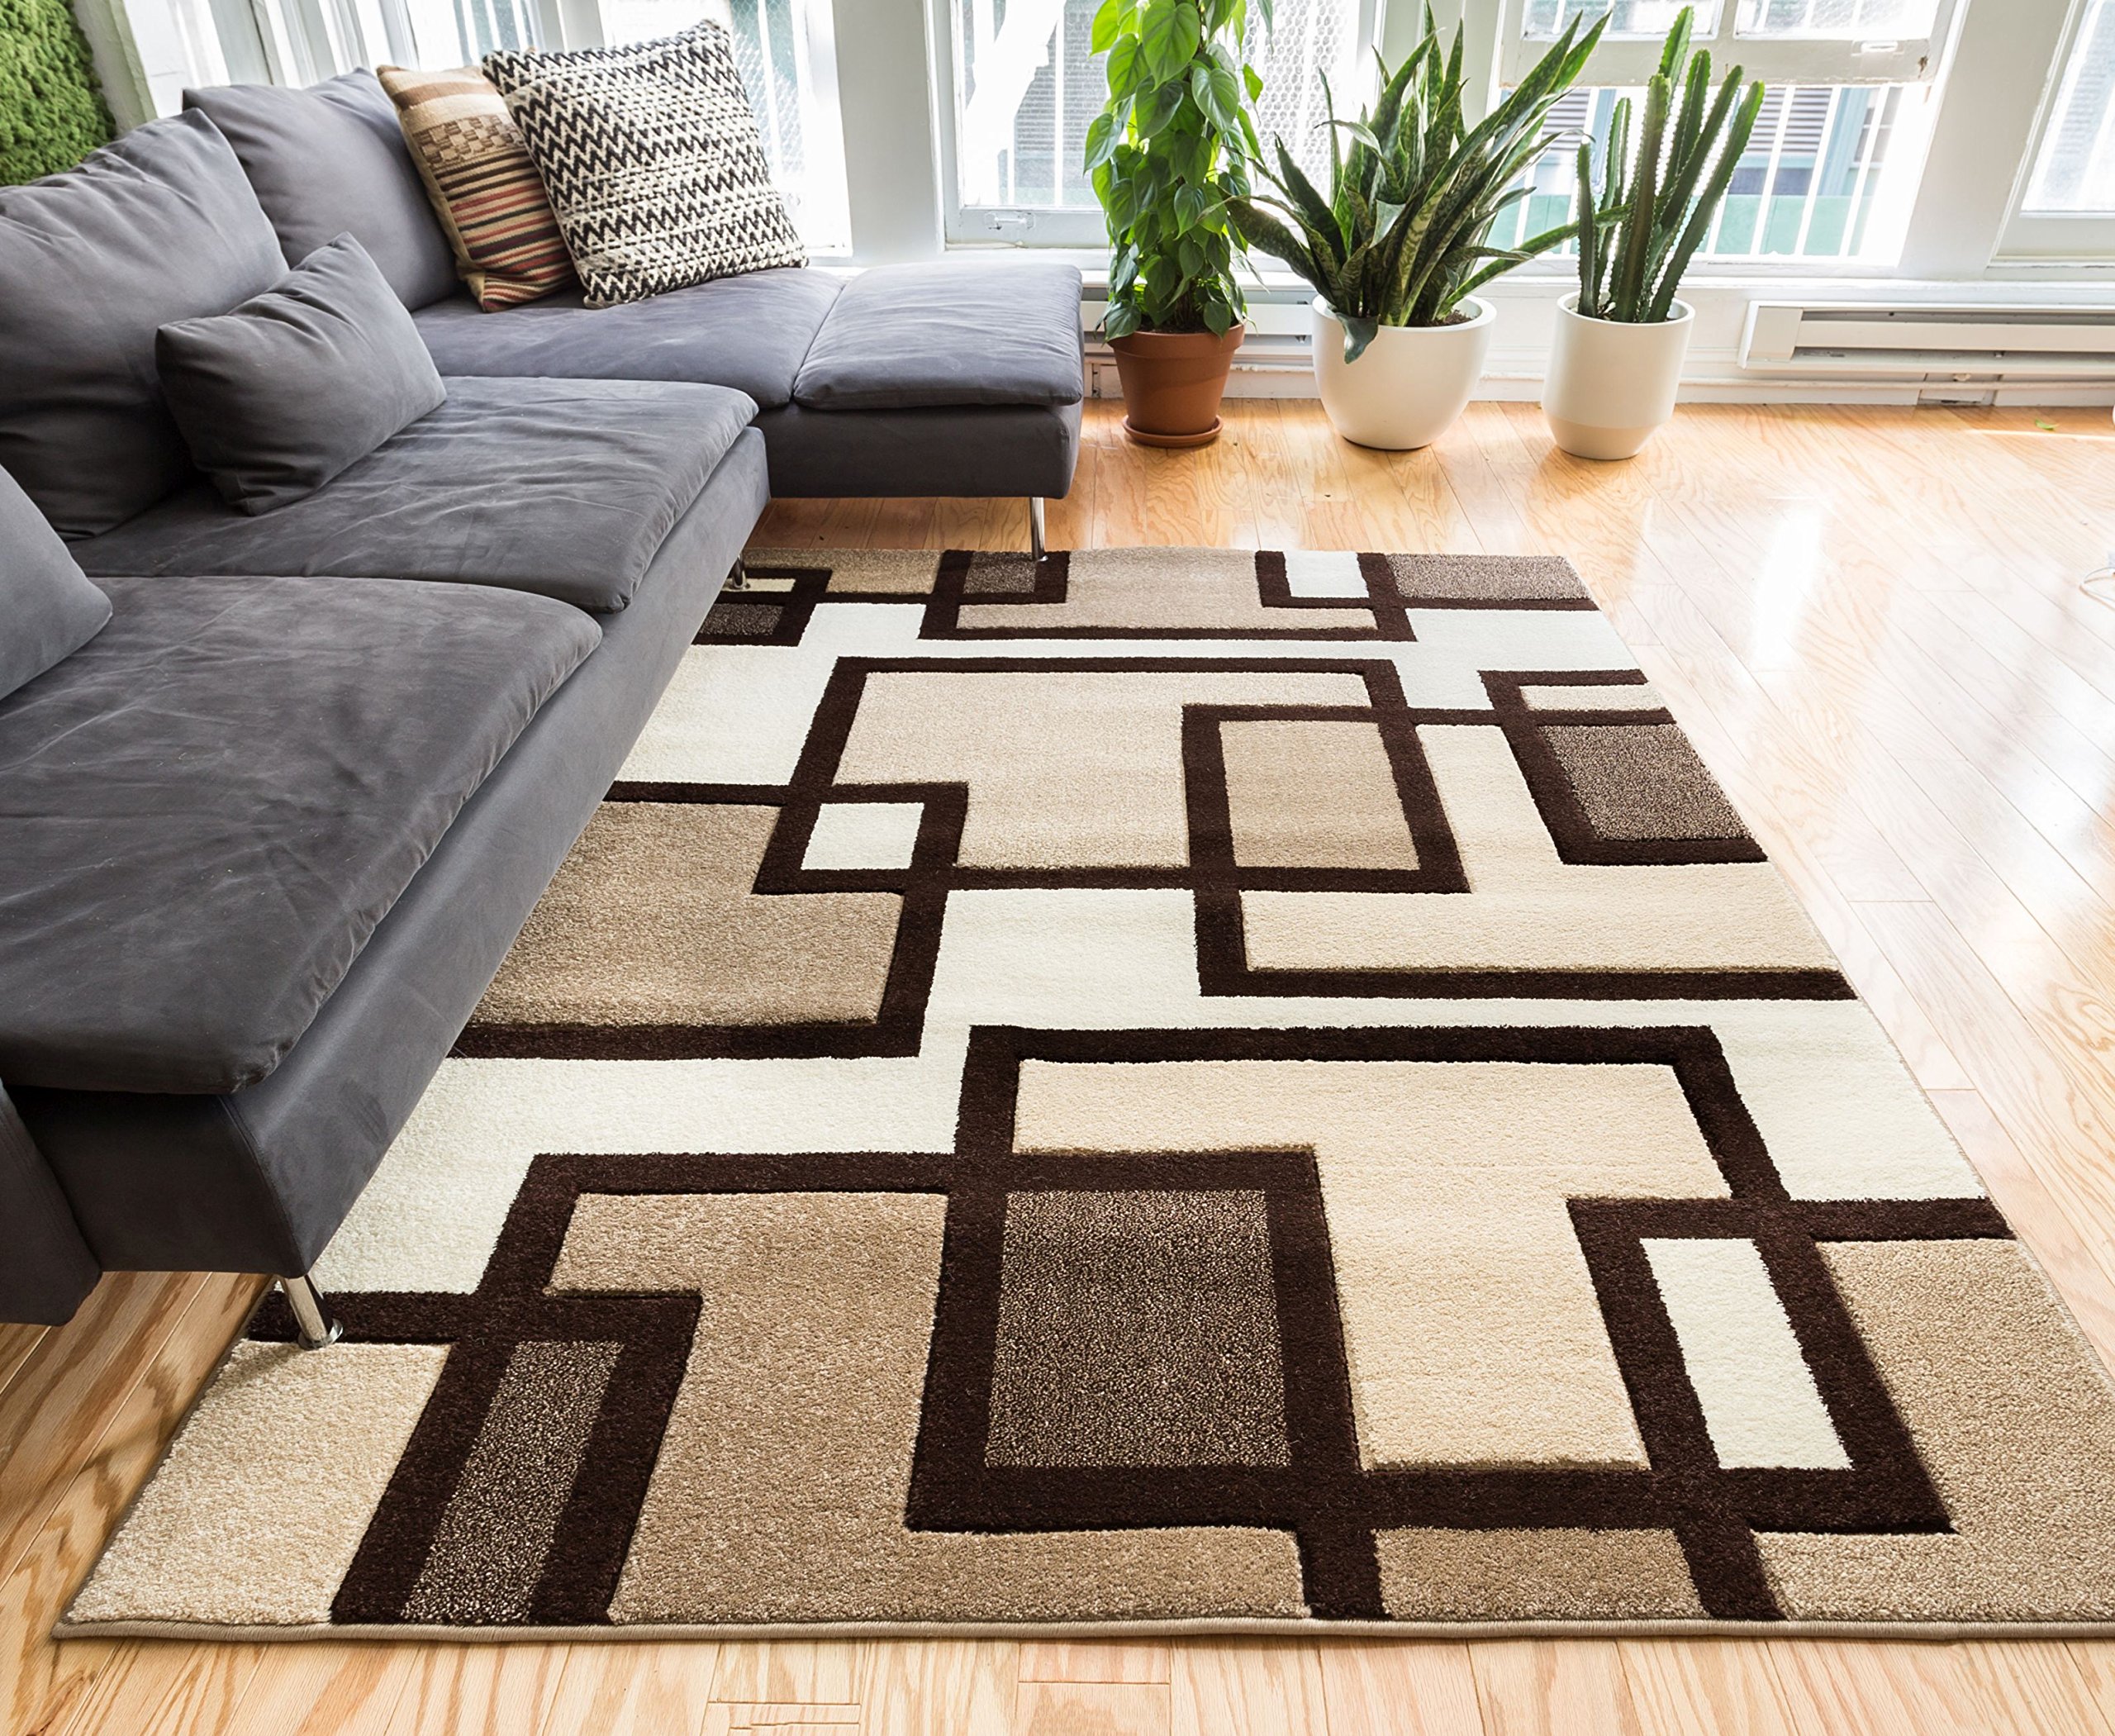 Cheap Area Rugs For Living Room